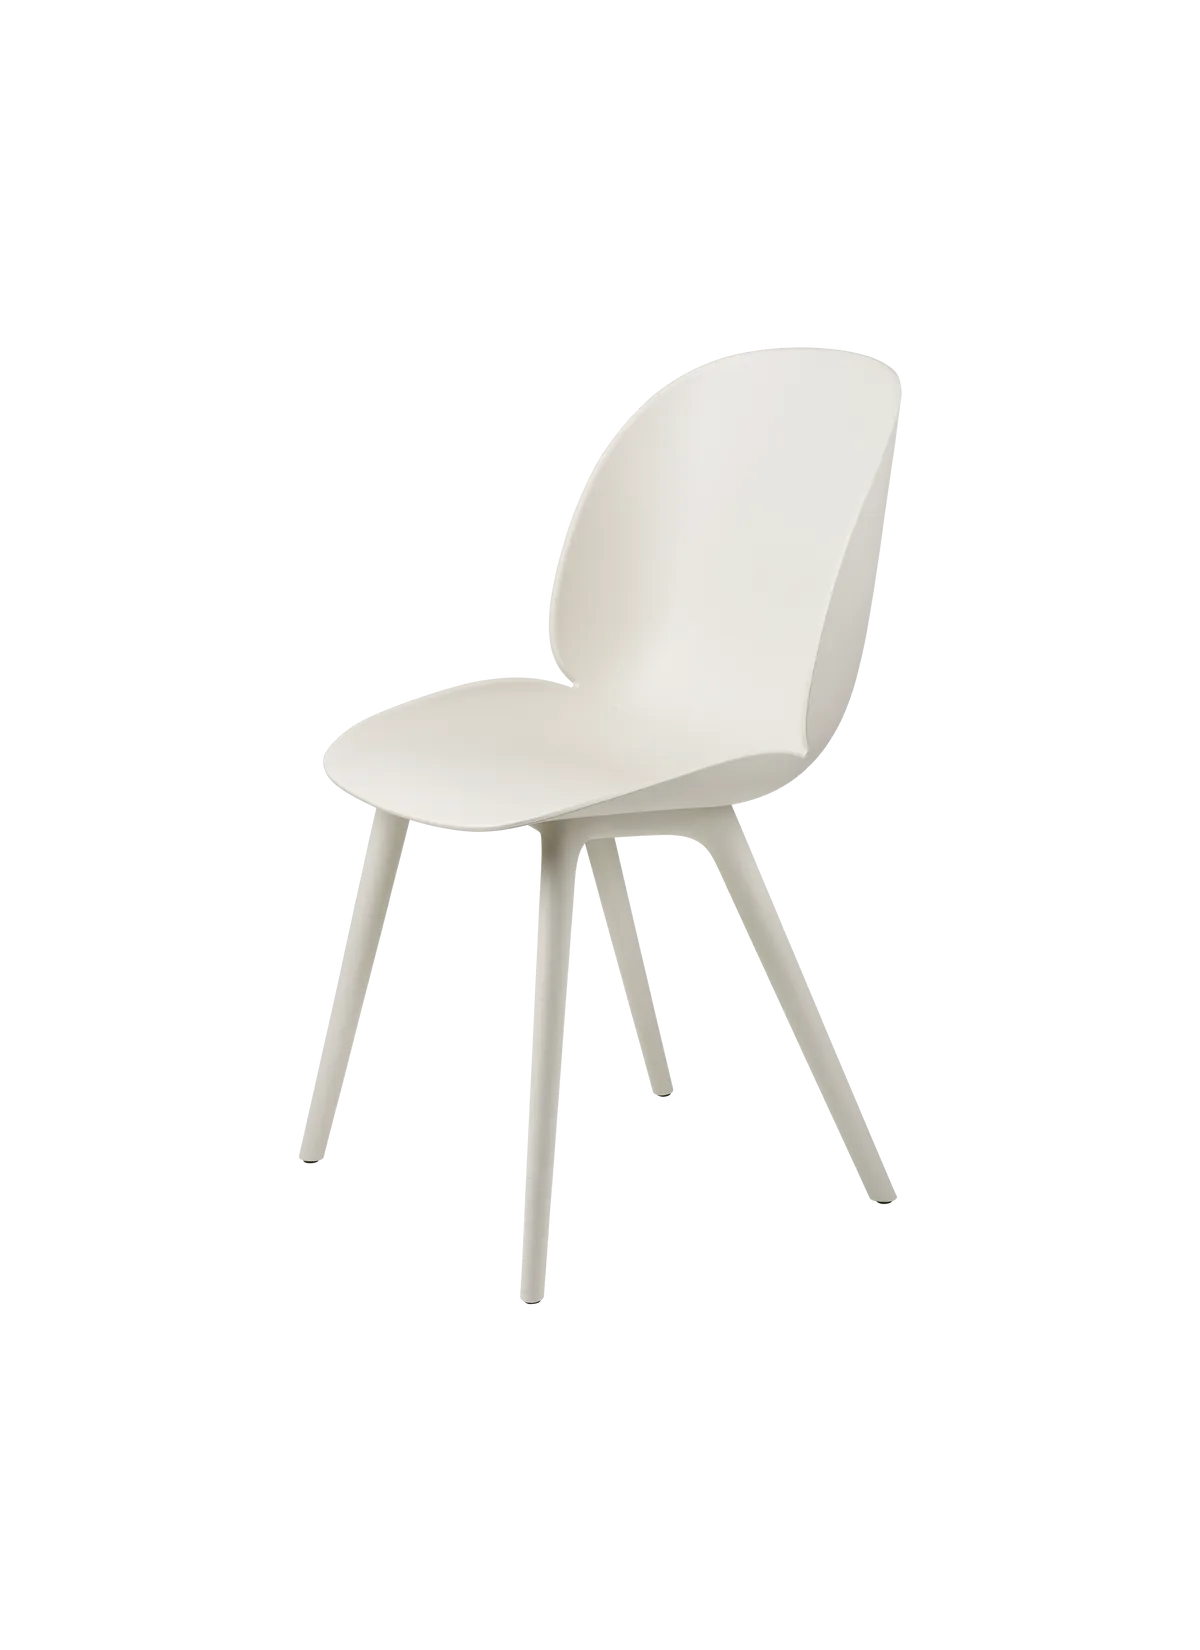 Beetle Dining Chair - Un-Upholstered - Plastic Base - Monochrome - Outdoor by Gubi